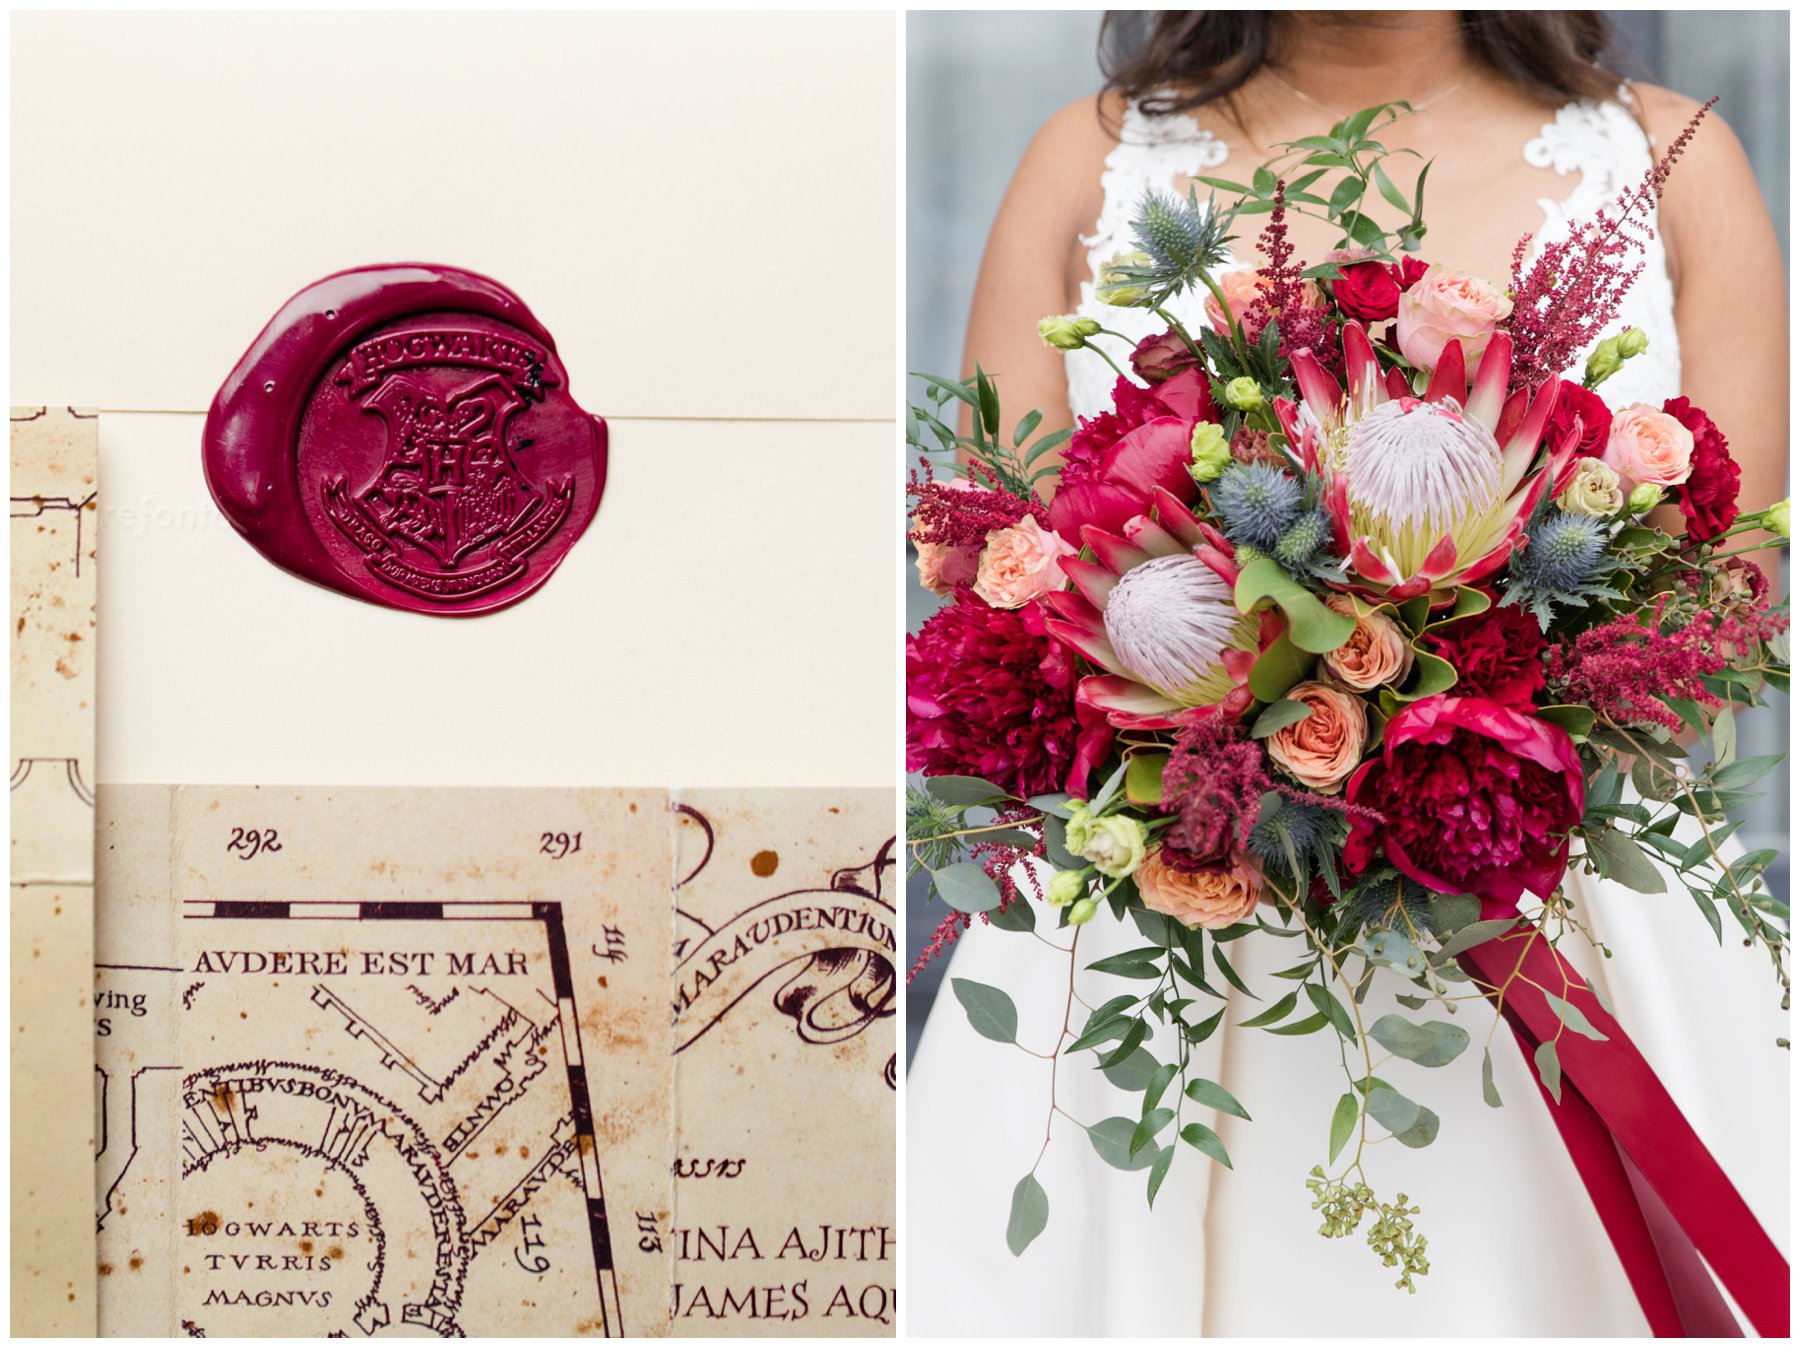 Harry Potter seal on wedding invitation and red protea bouquet